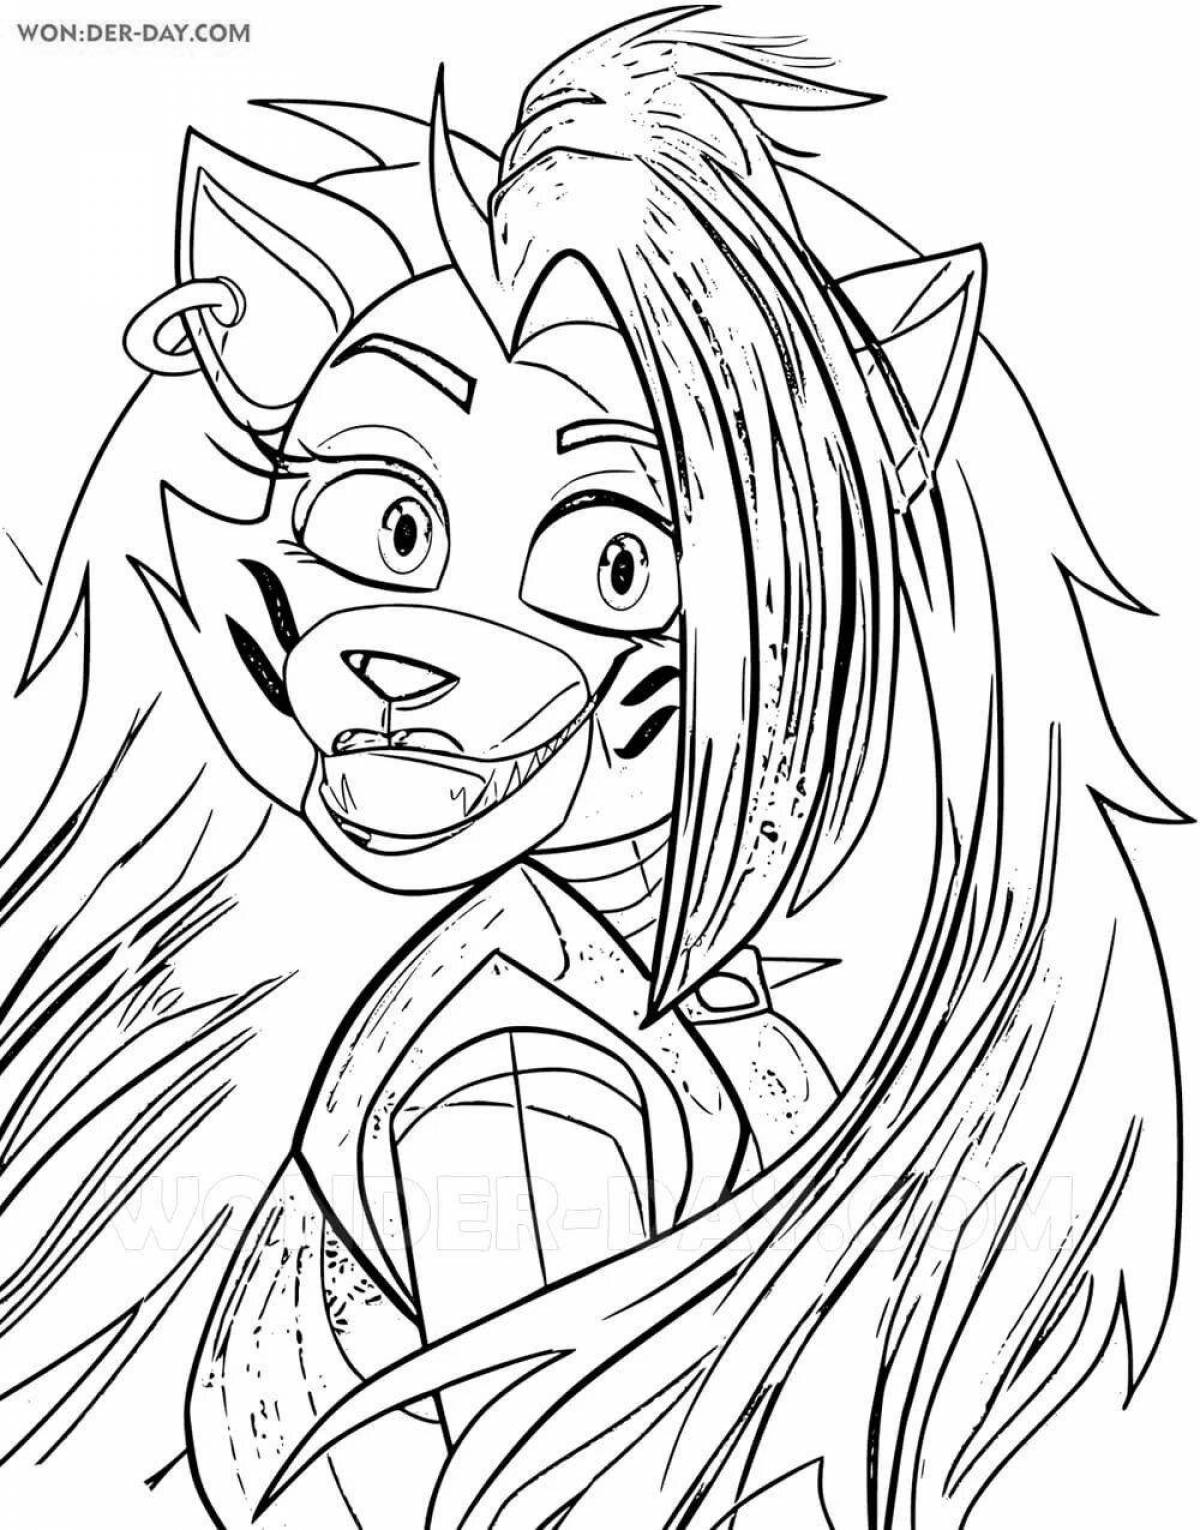 Coloring page charming roxana